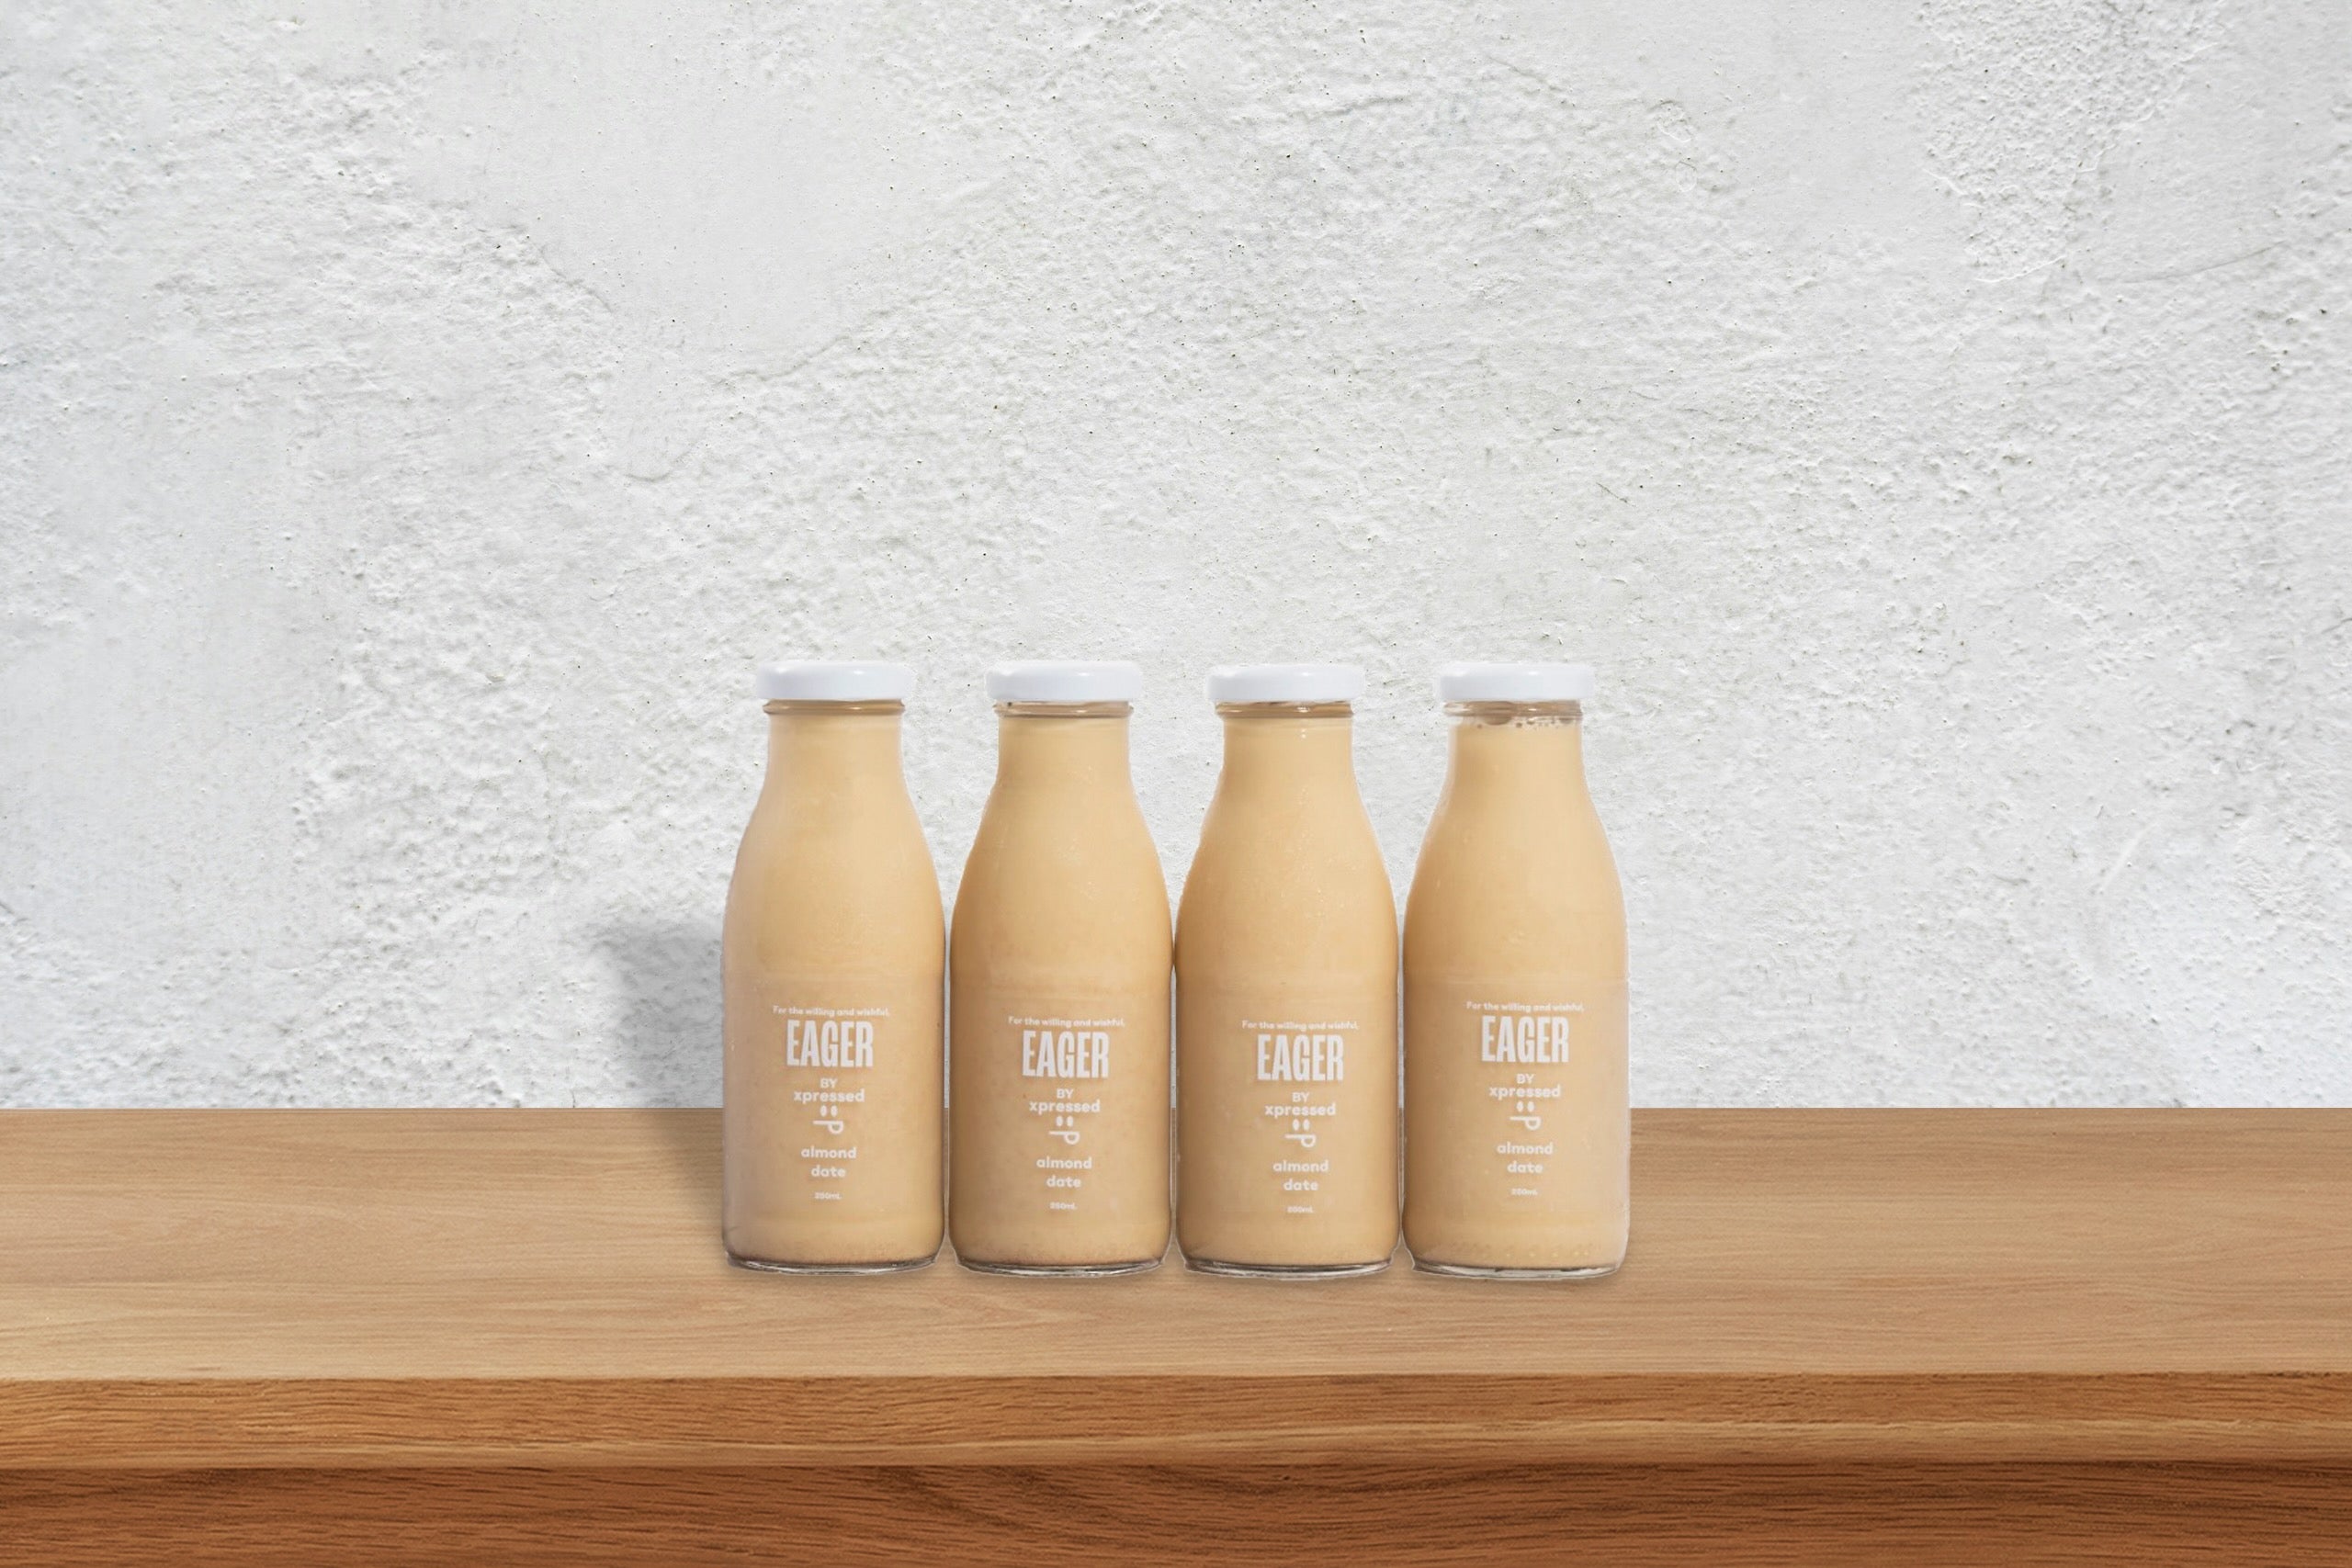 The Eager Mylk Crate